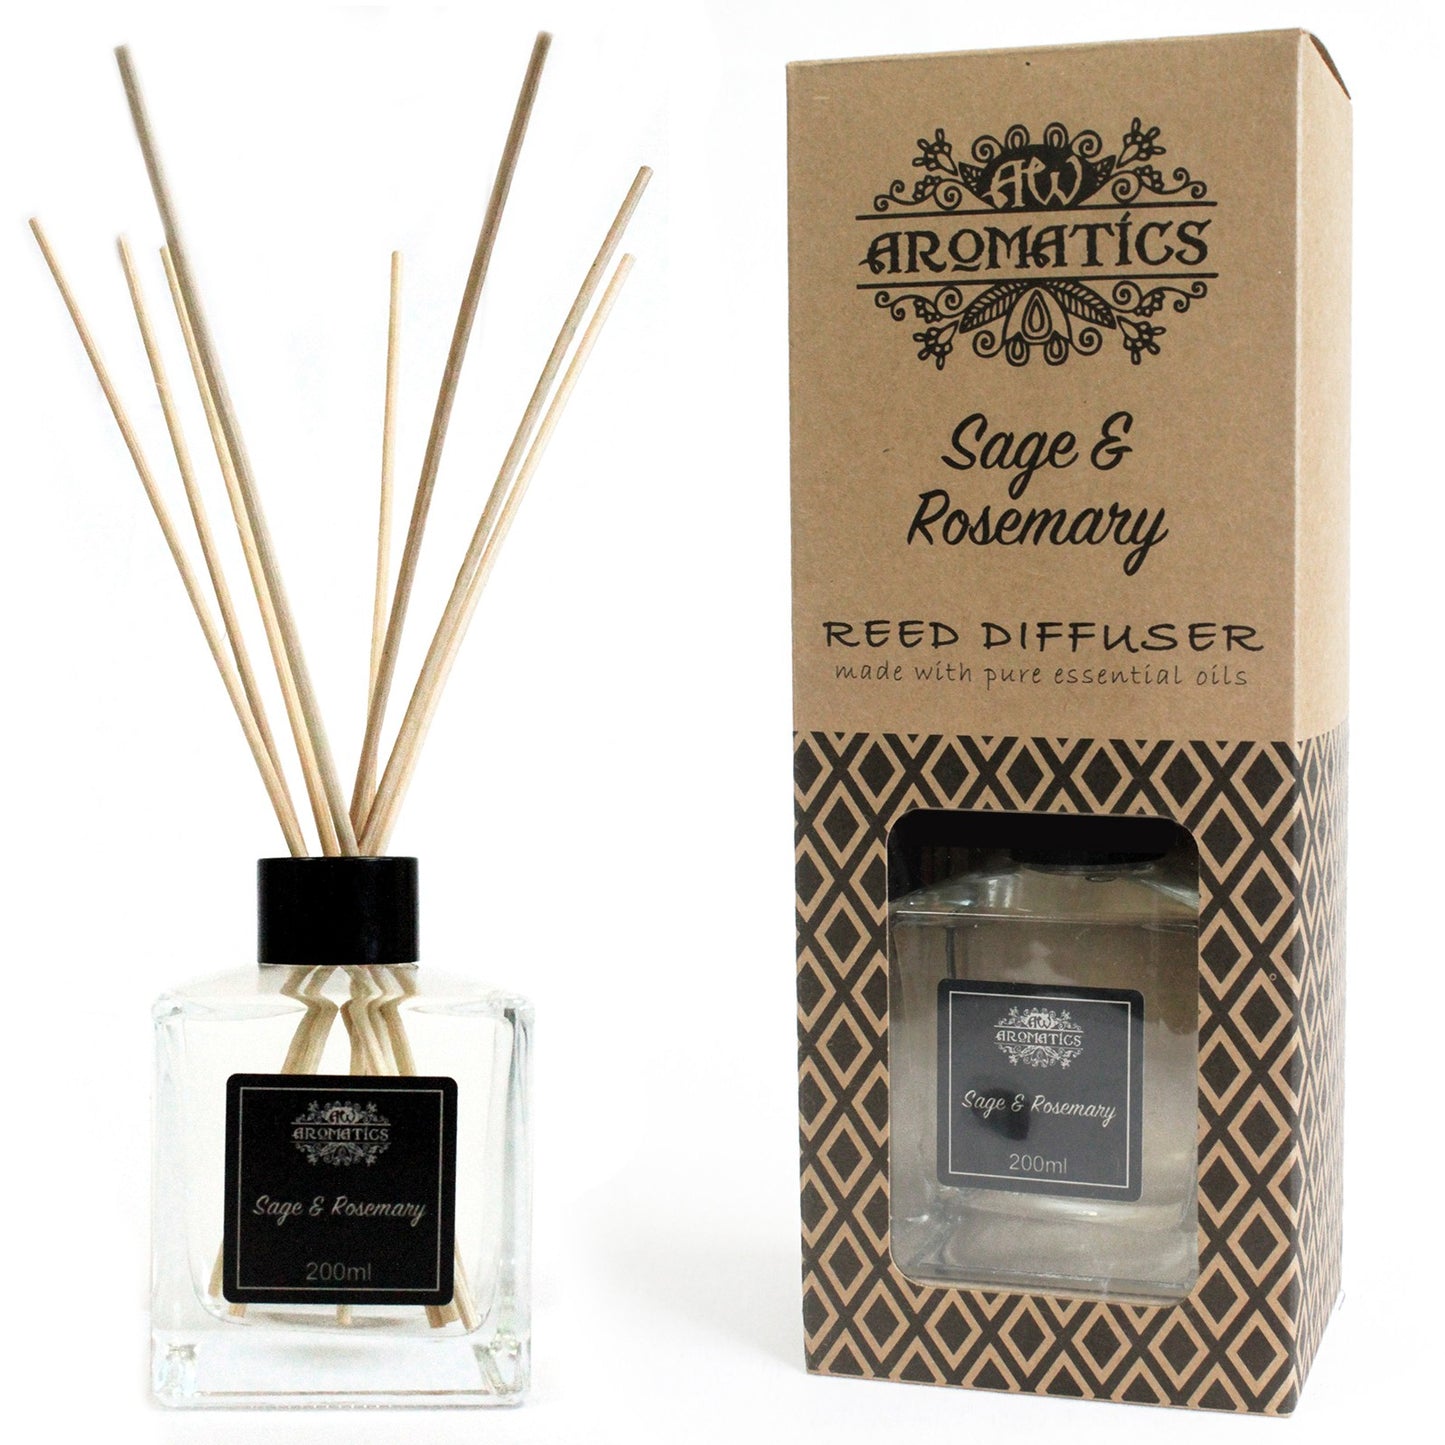 Sage & Rosemary Essential Oil Reed Diffuser Reed Diffuser - 200ml